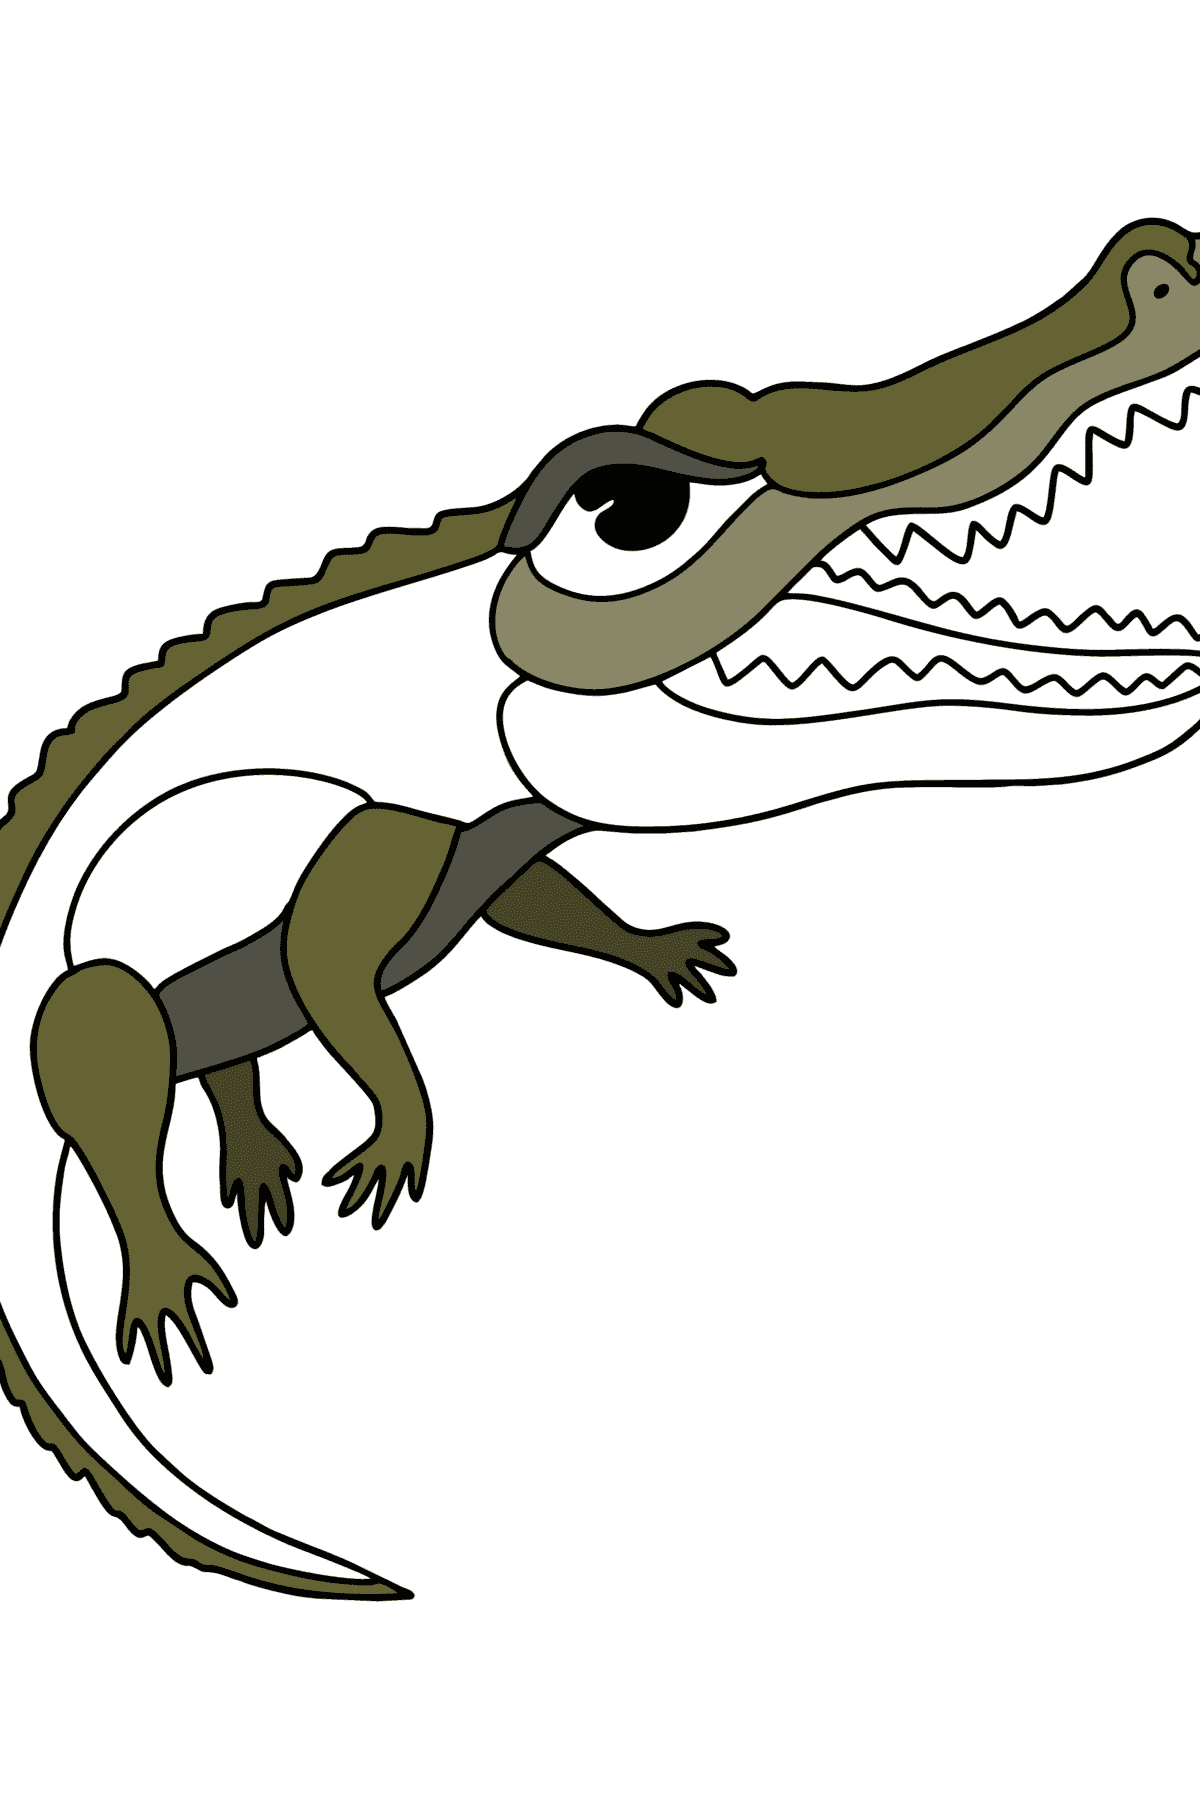 Saltwater Crocodile сoloring page - Coloring Pages for Kids